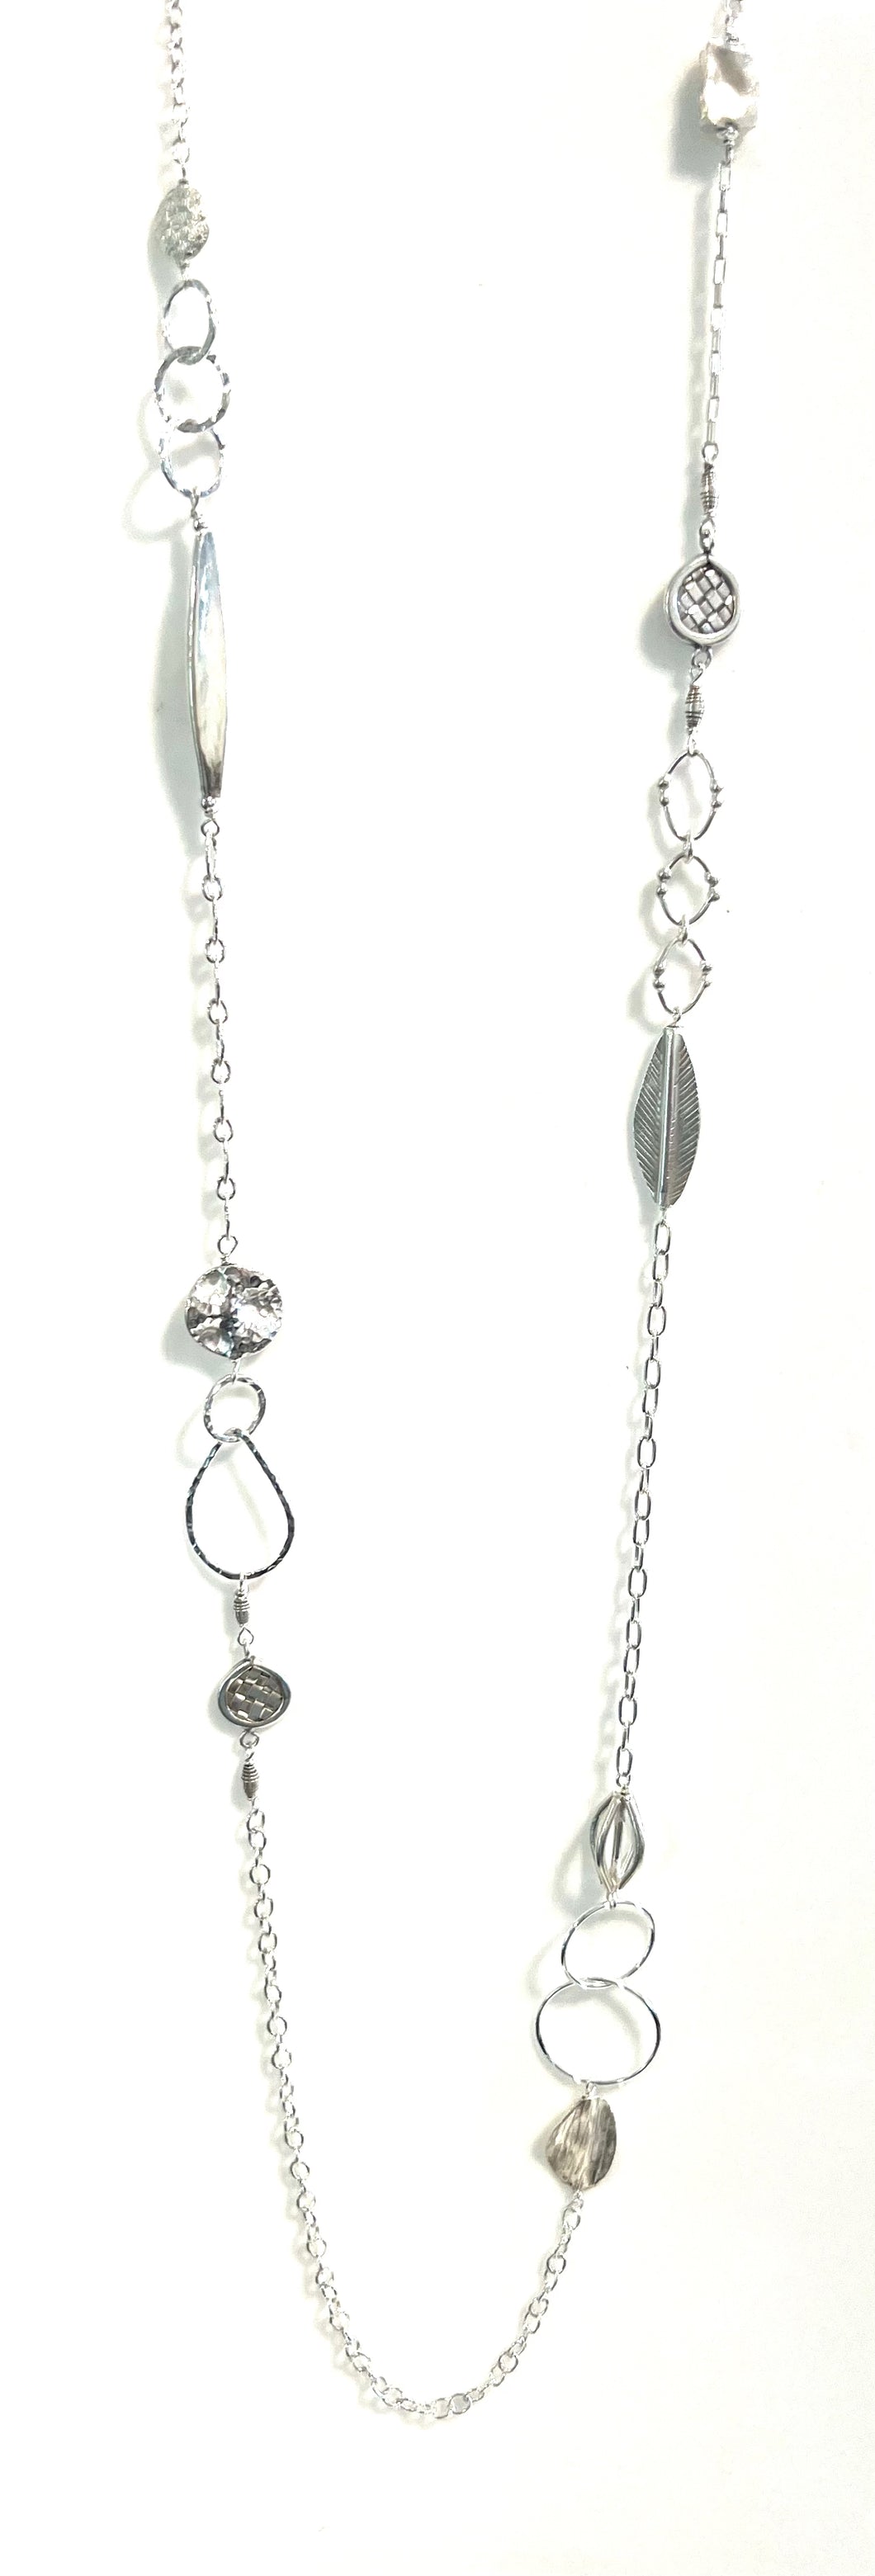 Sterling Silver Chain Necklace with Various Sterling Silver Pieces